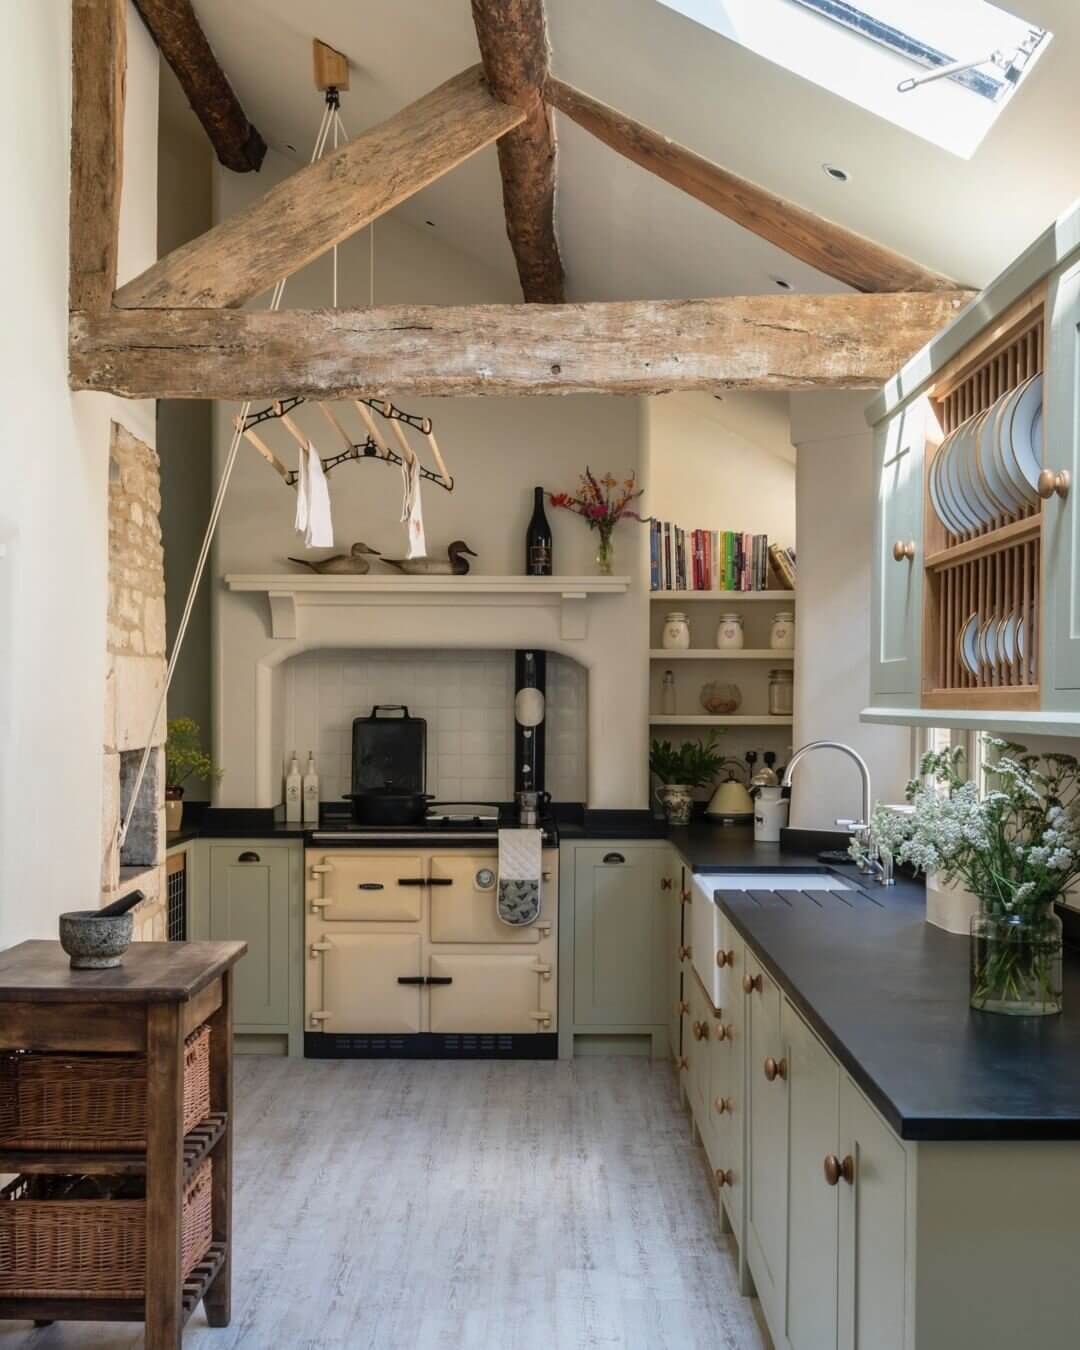 countrys-kitchens-exposeds-beams-skylights-nordroom